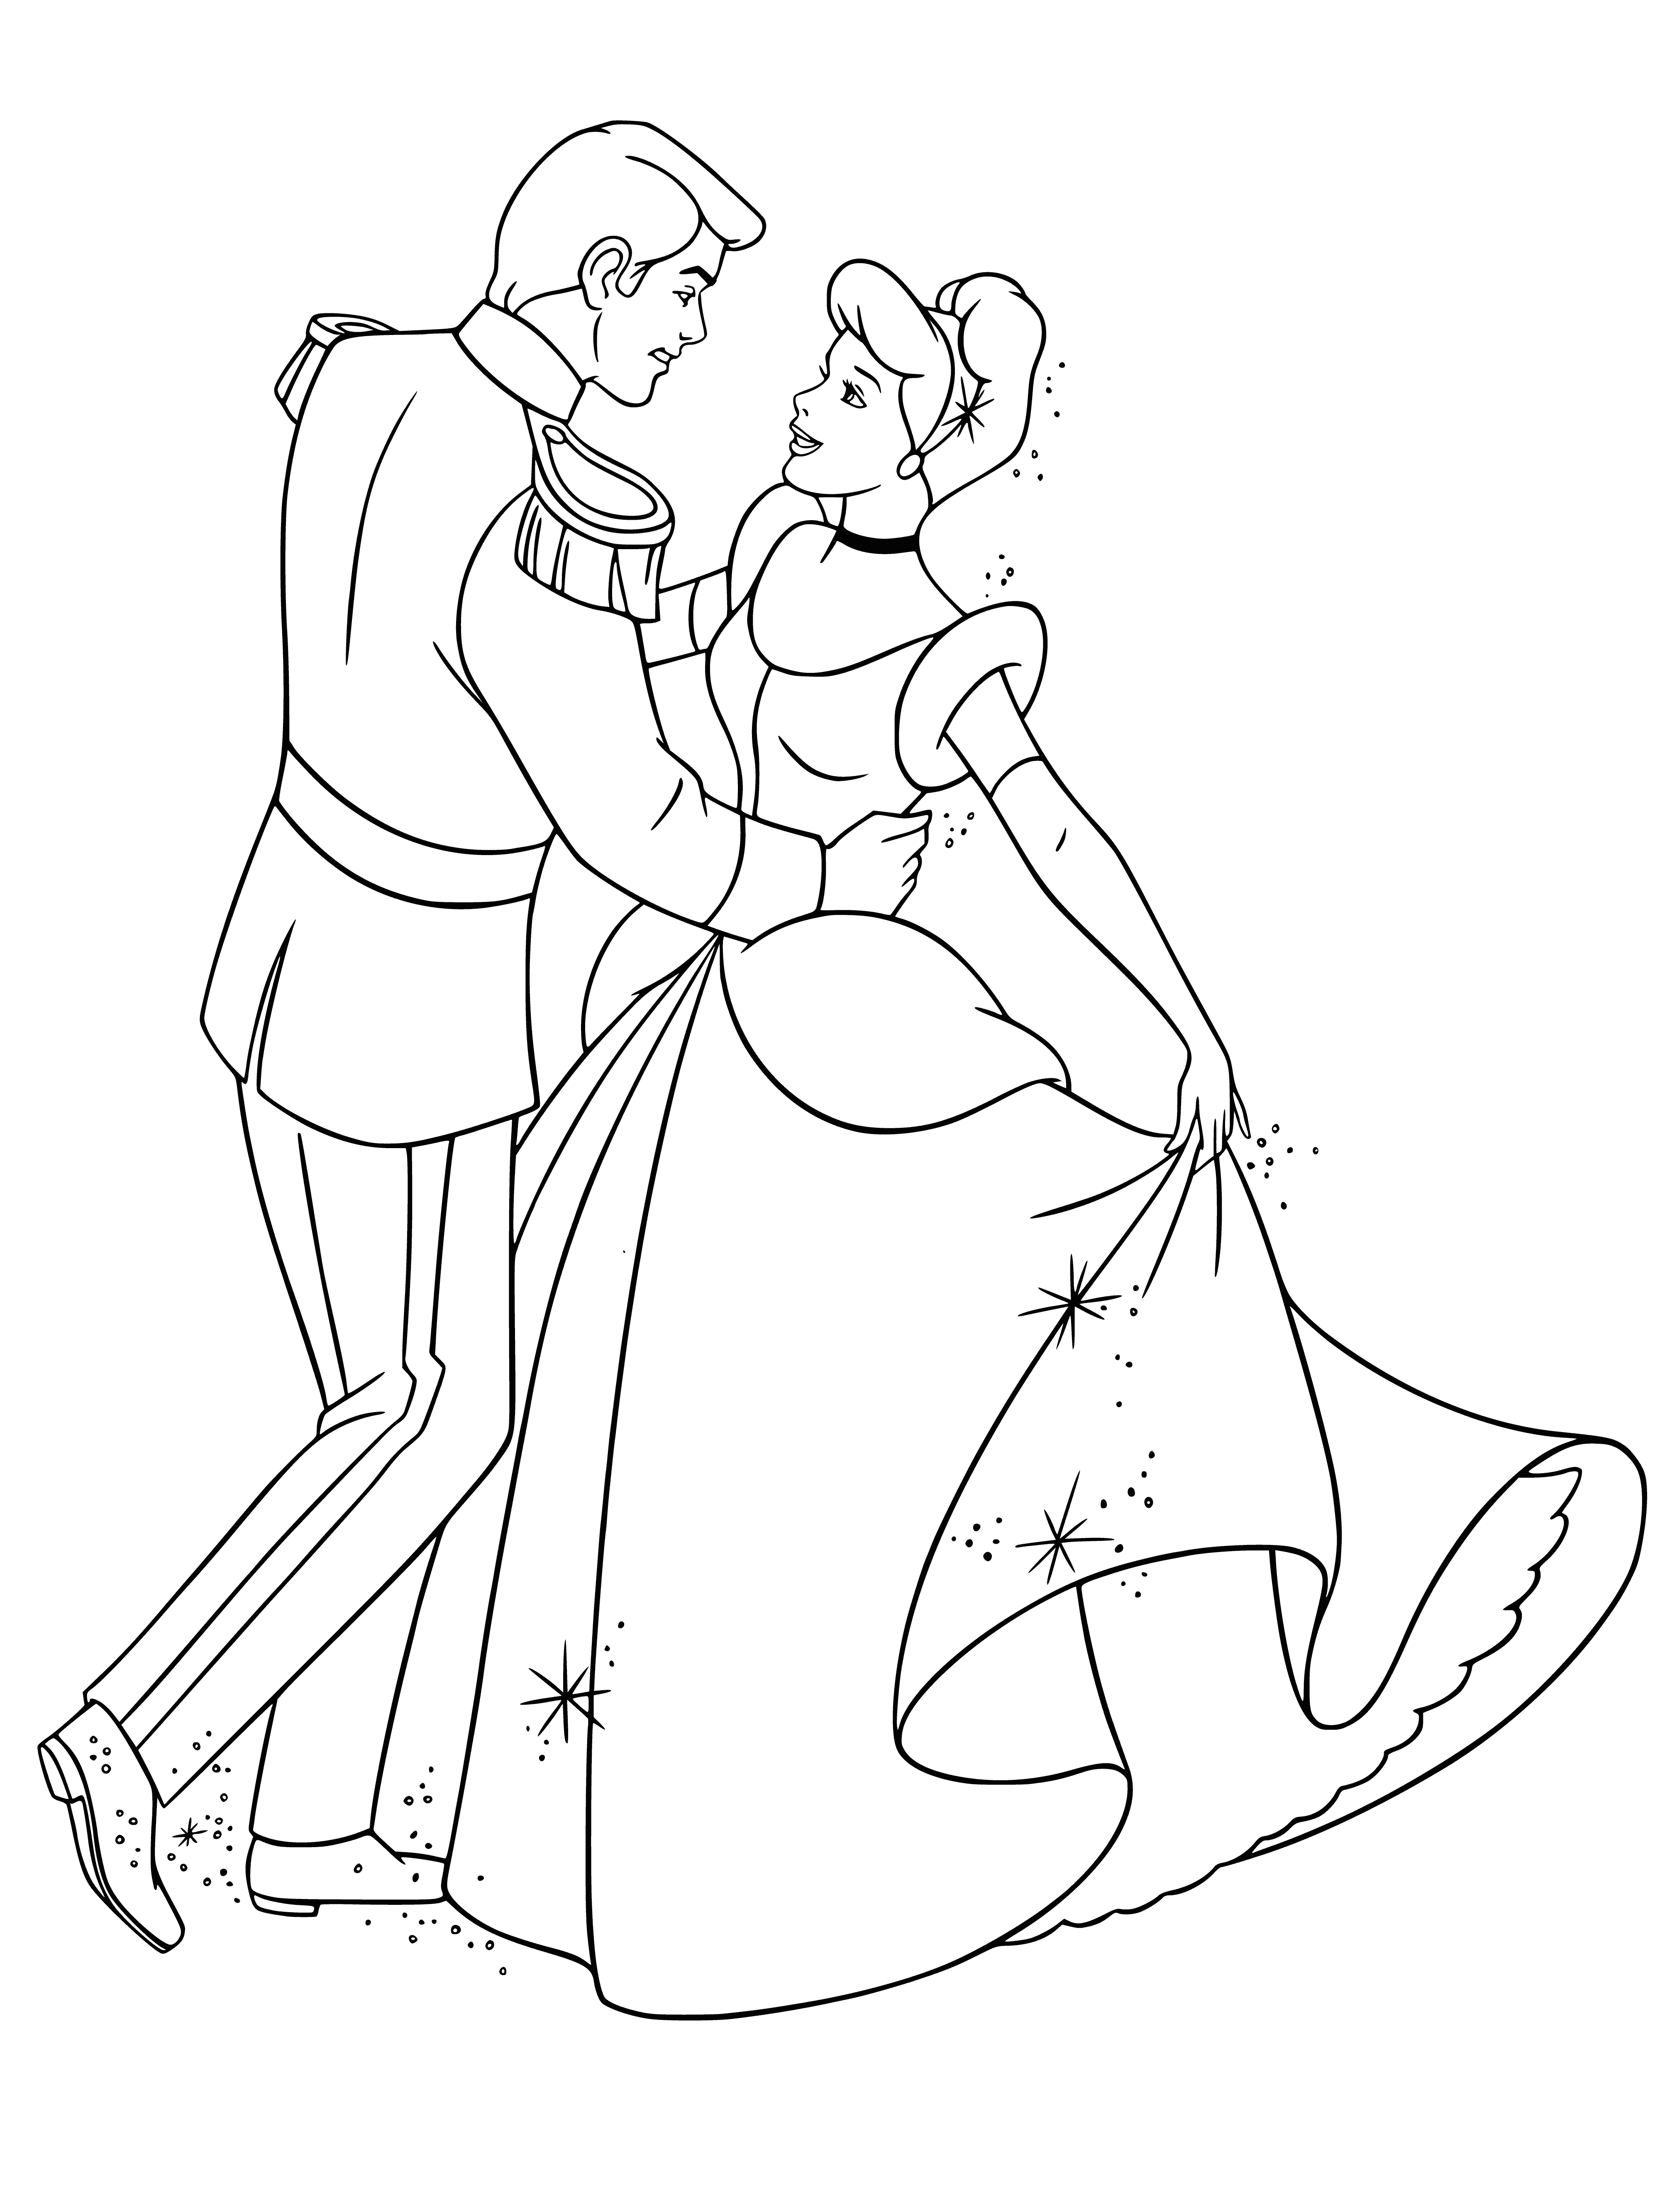 Cinderella dancing with the prince at the ball coloring page